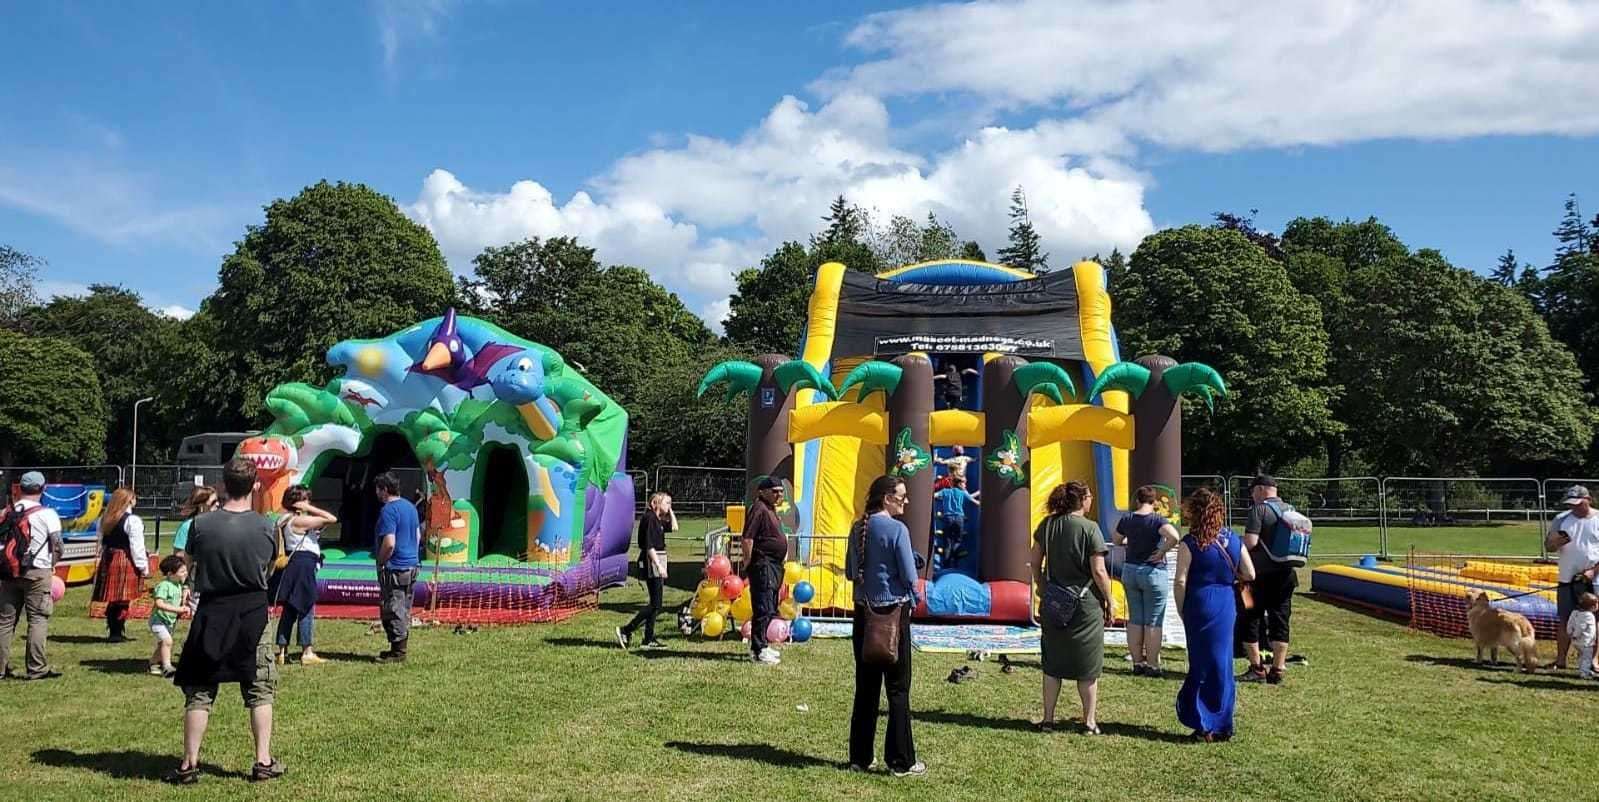 A Bught Park event featuring some of the inflatables